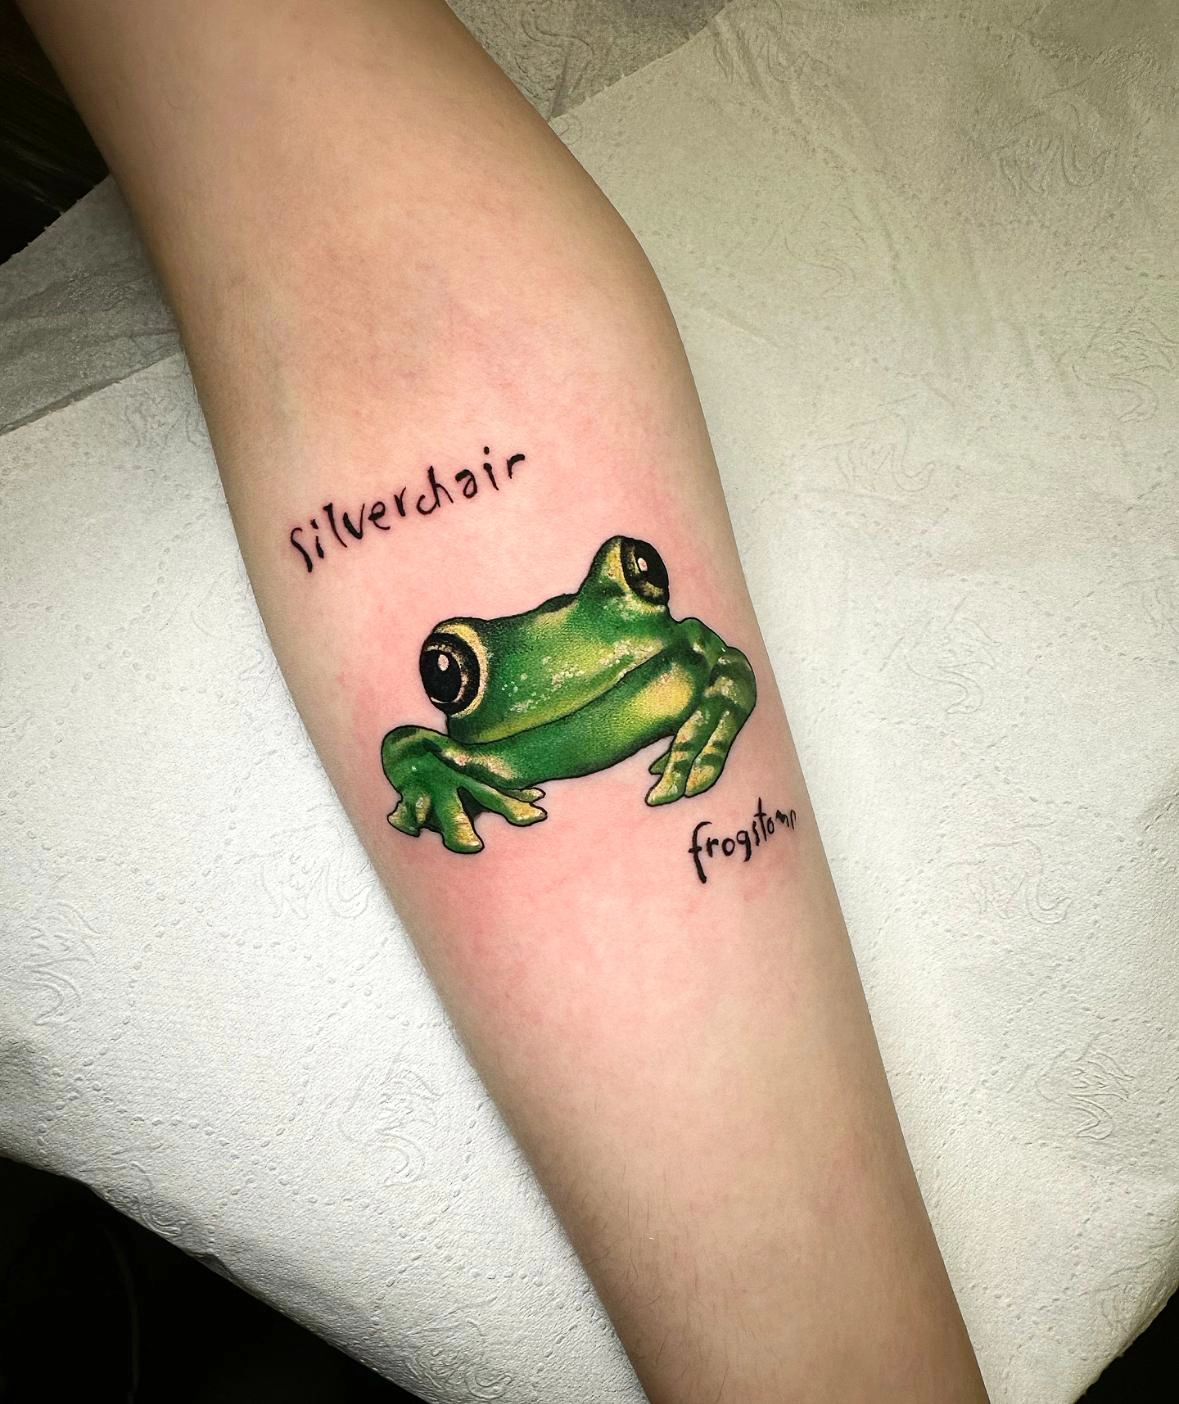 Copper Coil Tattoo on Instagram Posted withregram  heartsbane Cheeked  up lol tree frog    tattoos florida tattooer coppercoiltattoo  seladytattooers hotfrog